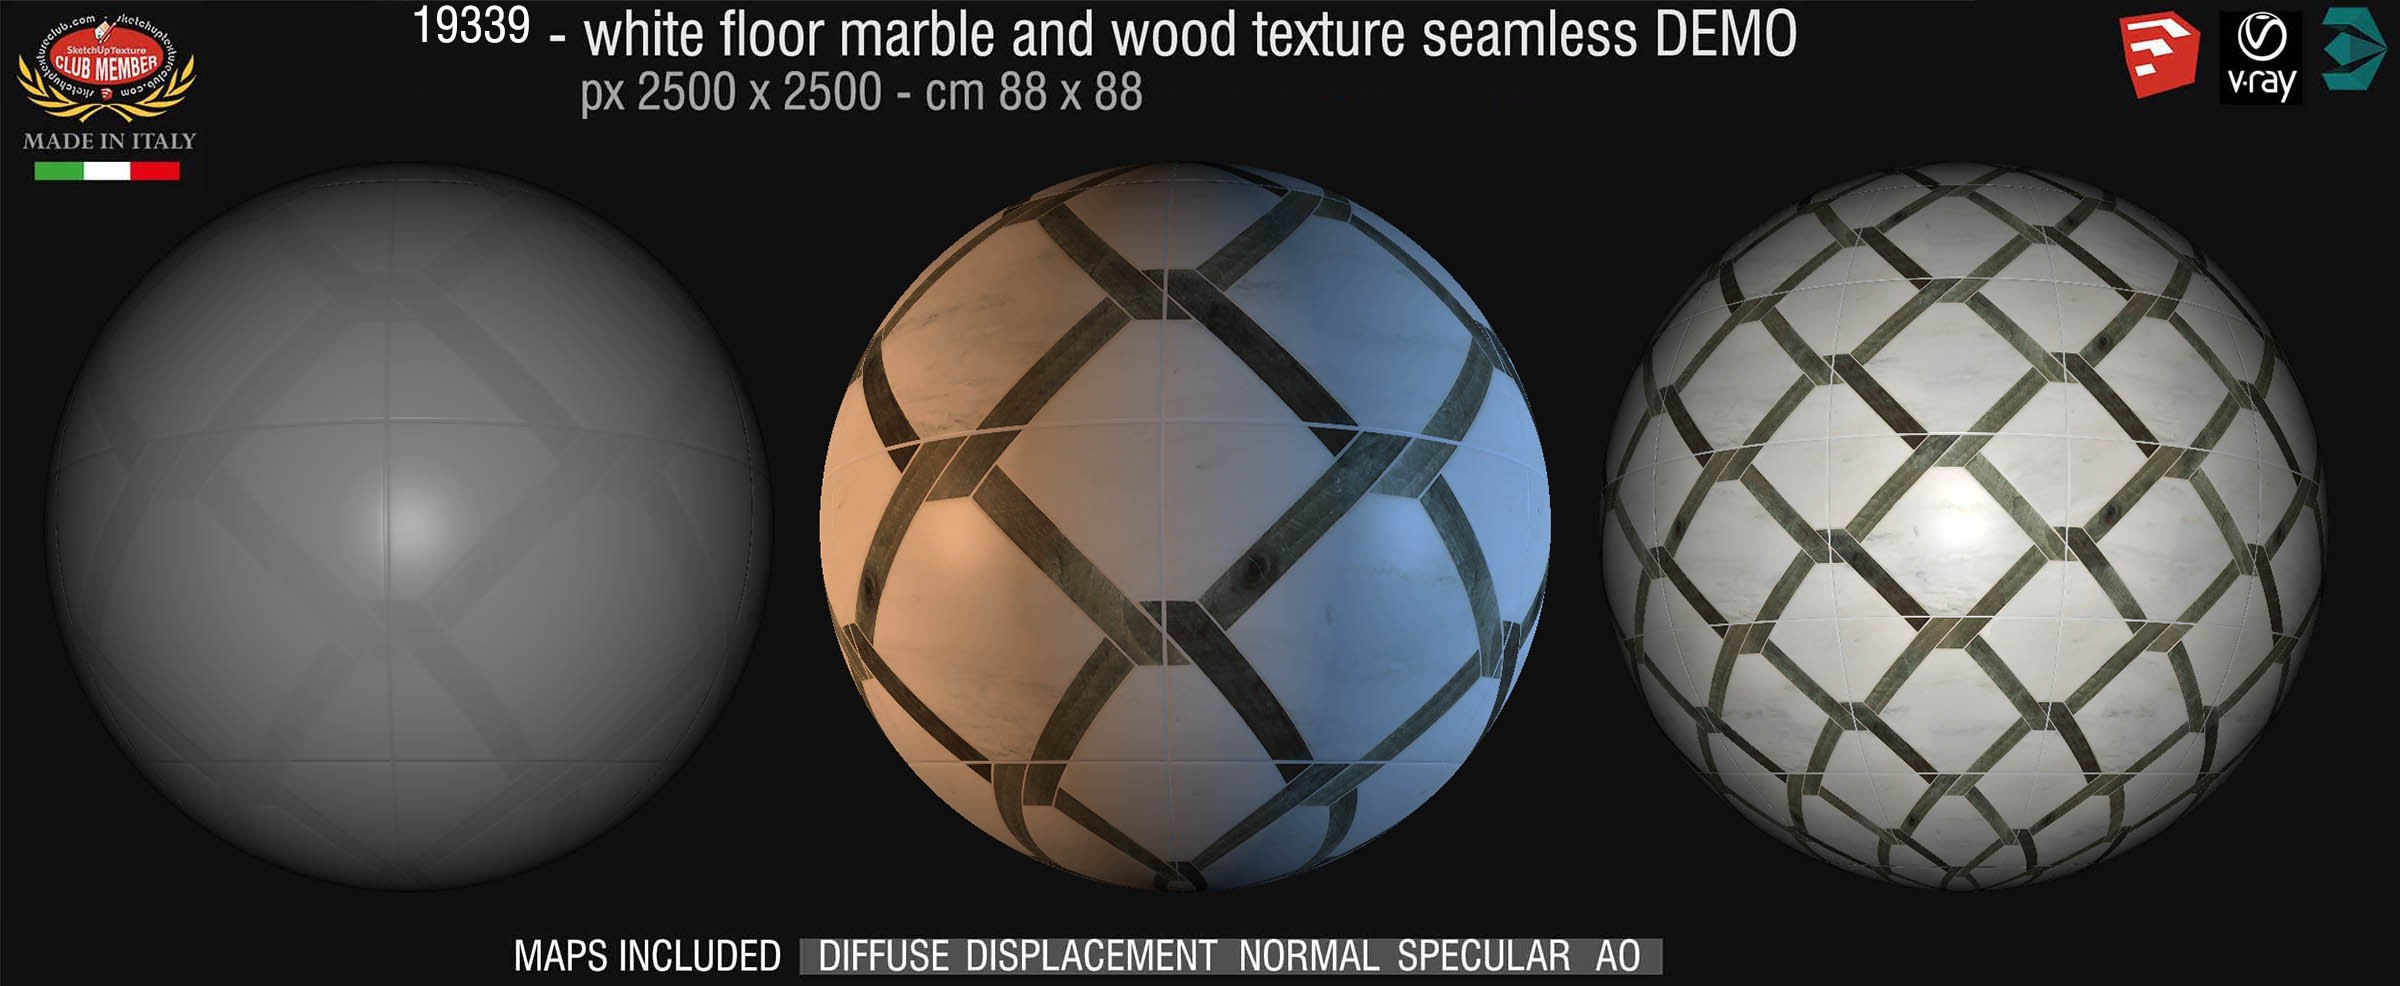 19339 White floor marble and wood geometric pattern texture seamless + maps DEMO